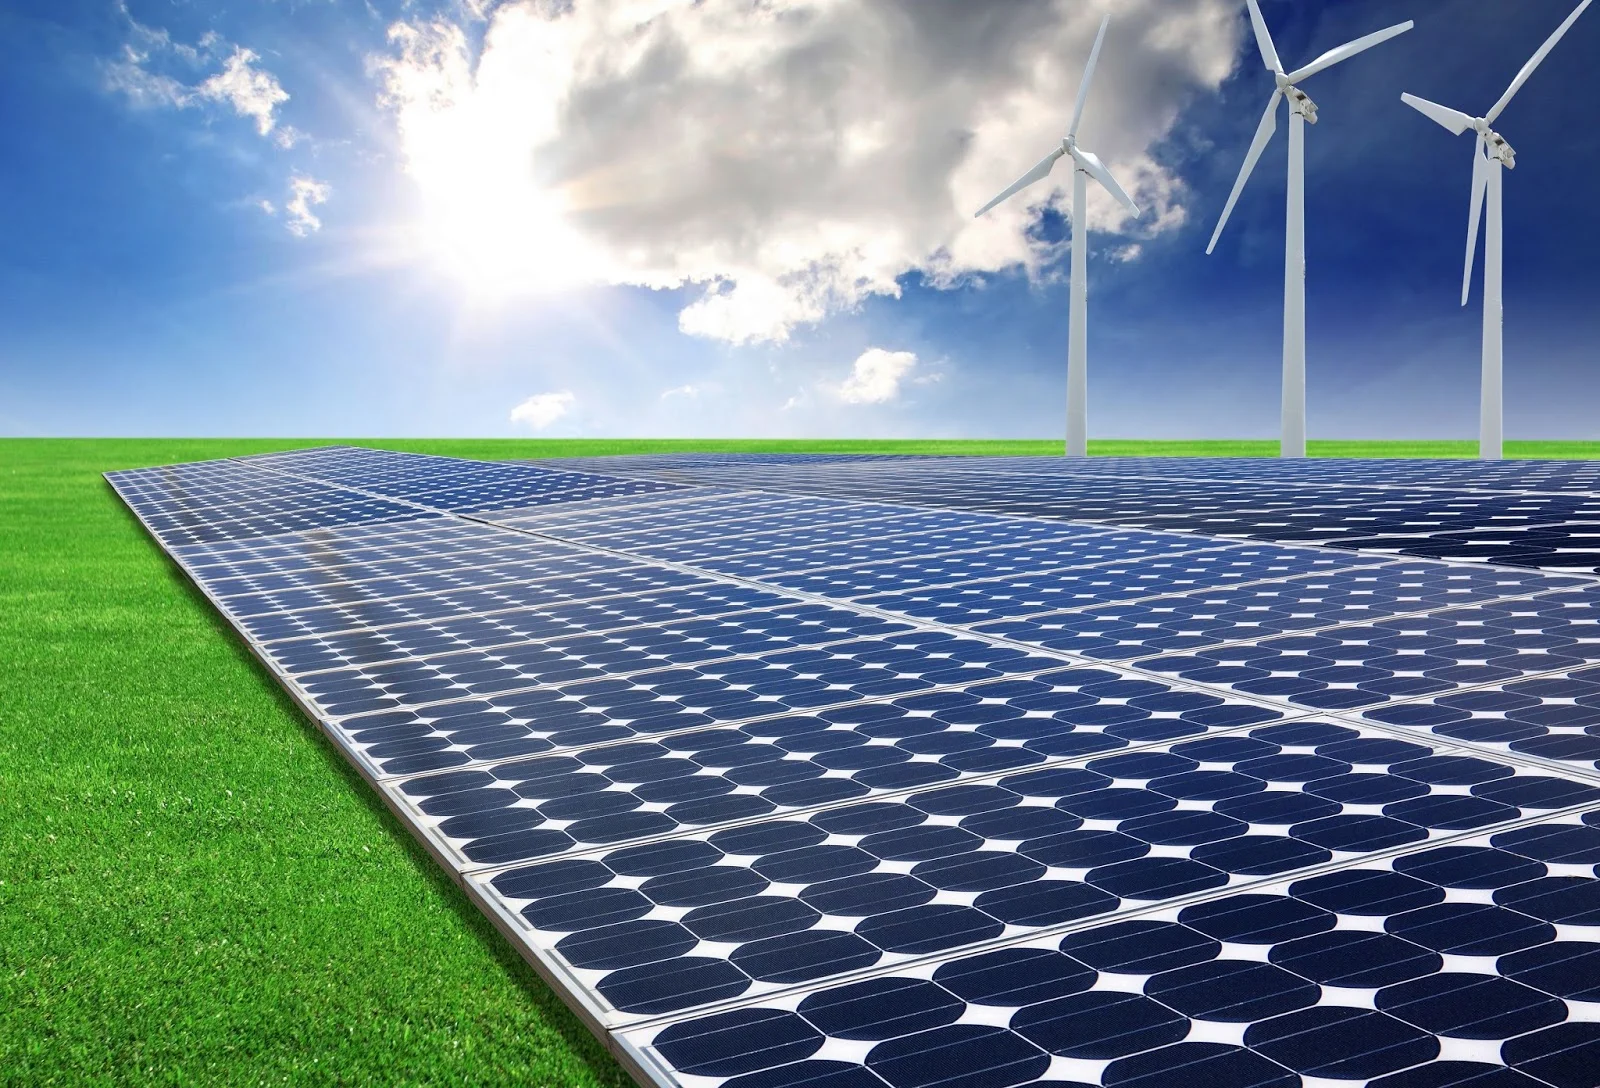 Should You Use Green Energy? Check Out The Reasons Why!